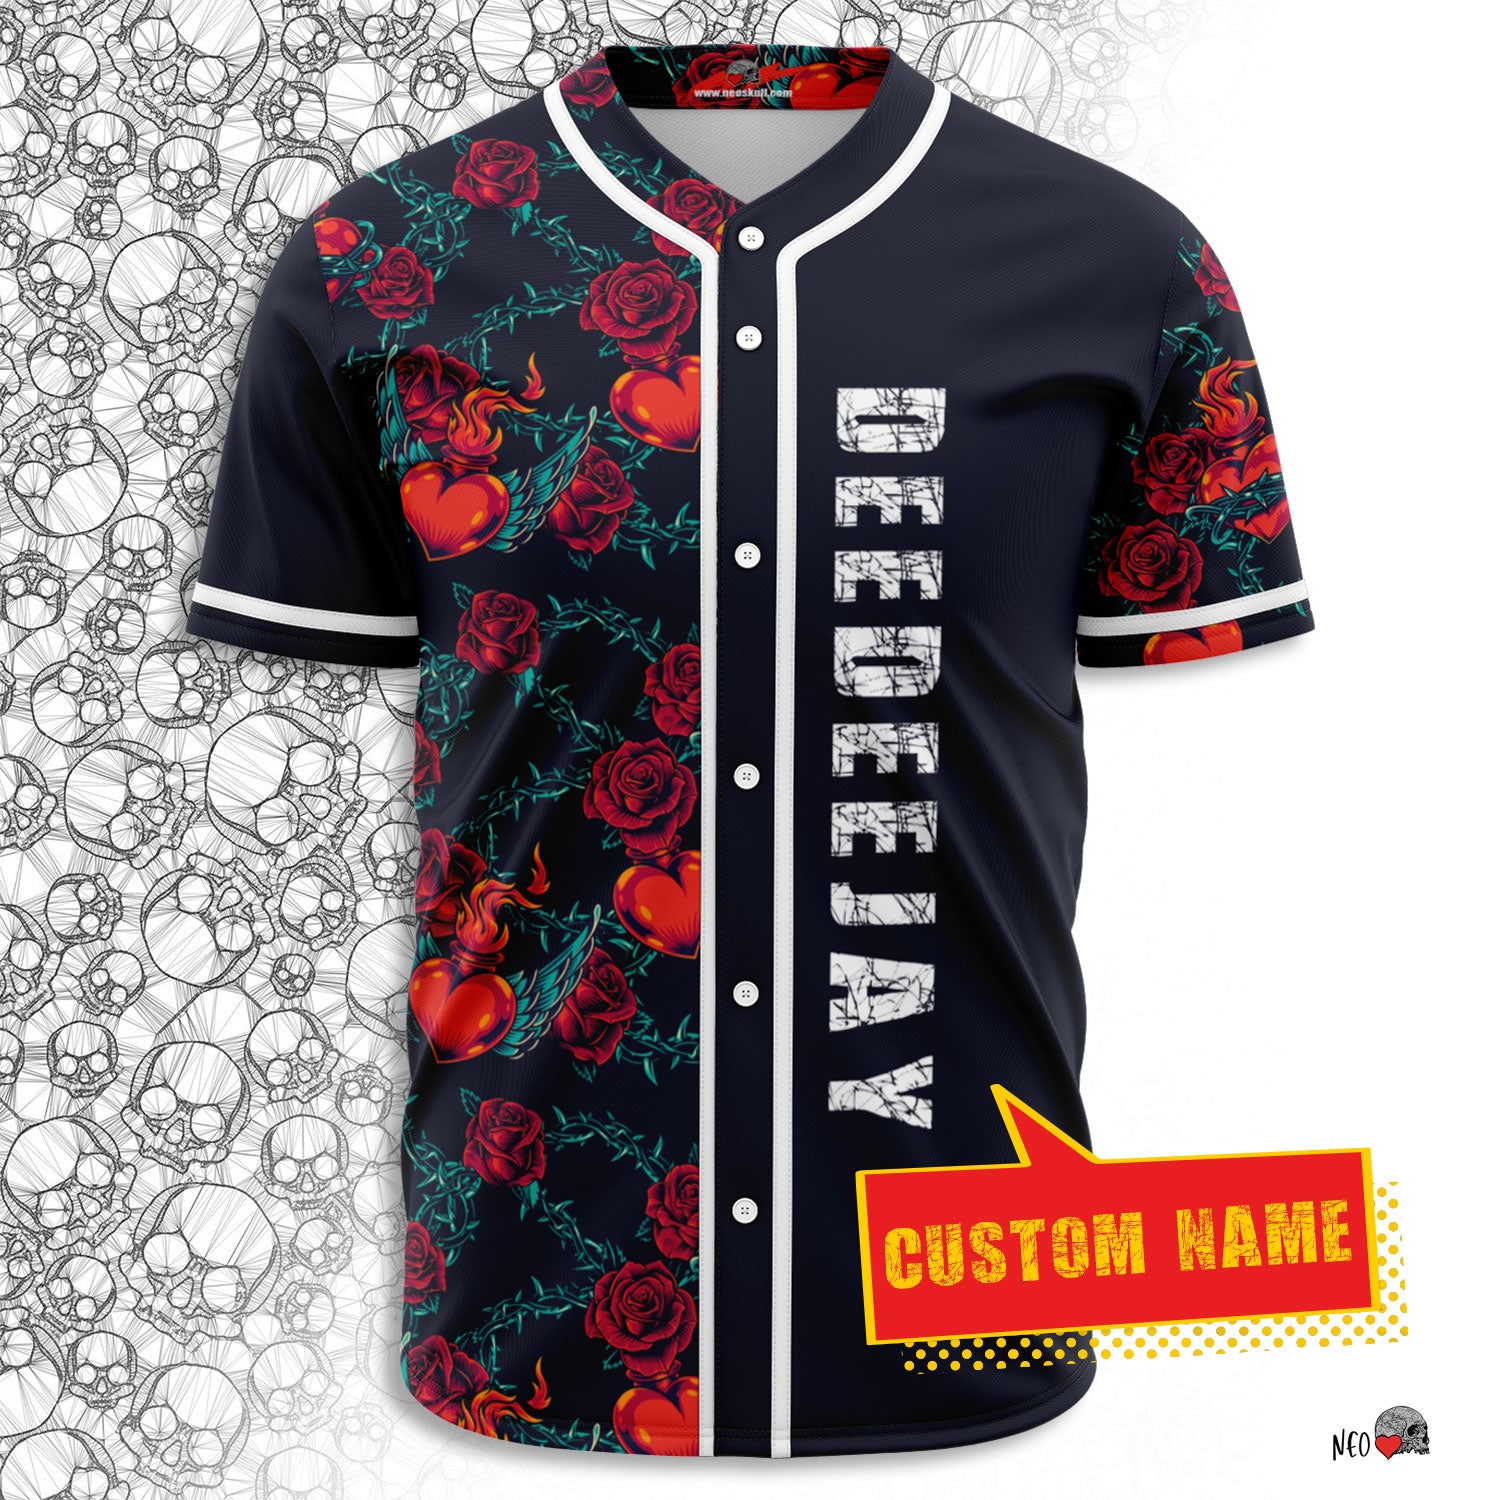 custom name personalized baseball jersey - fiery hearts and roses - neoskull